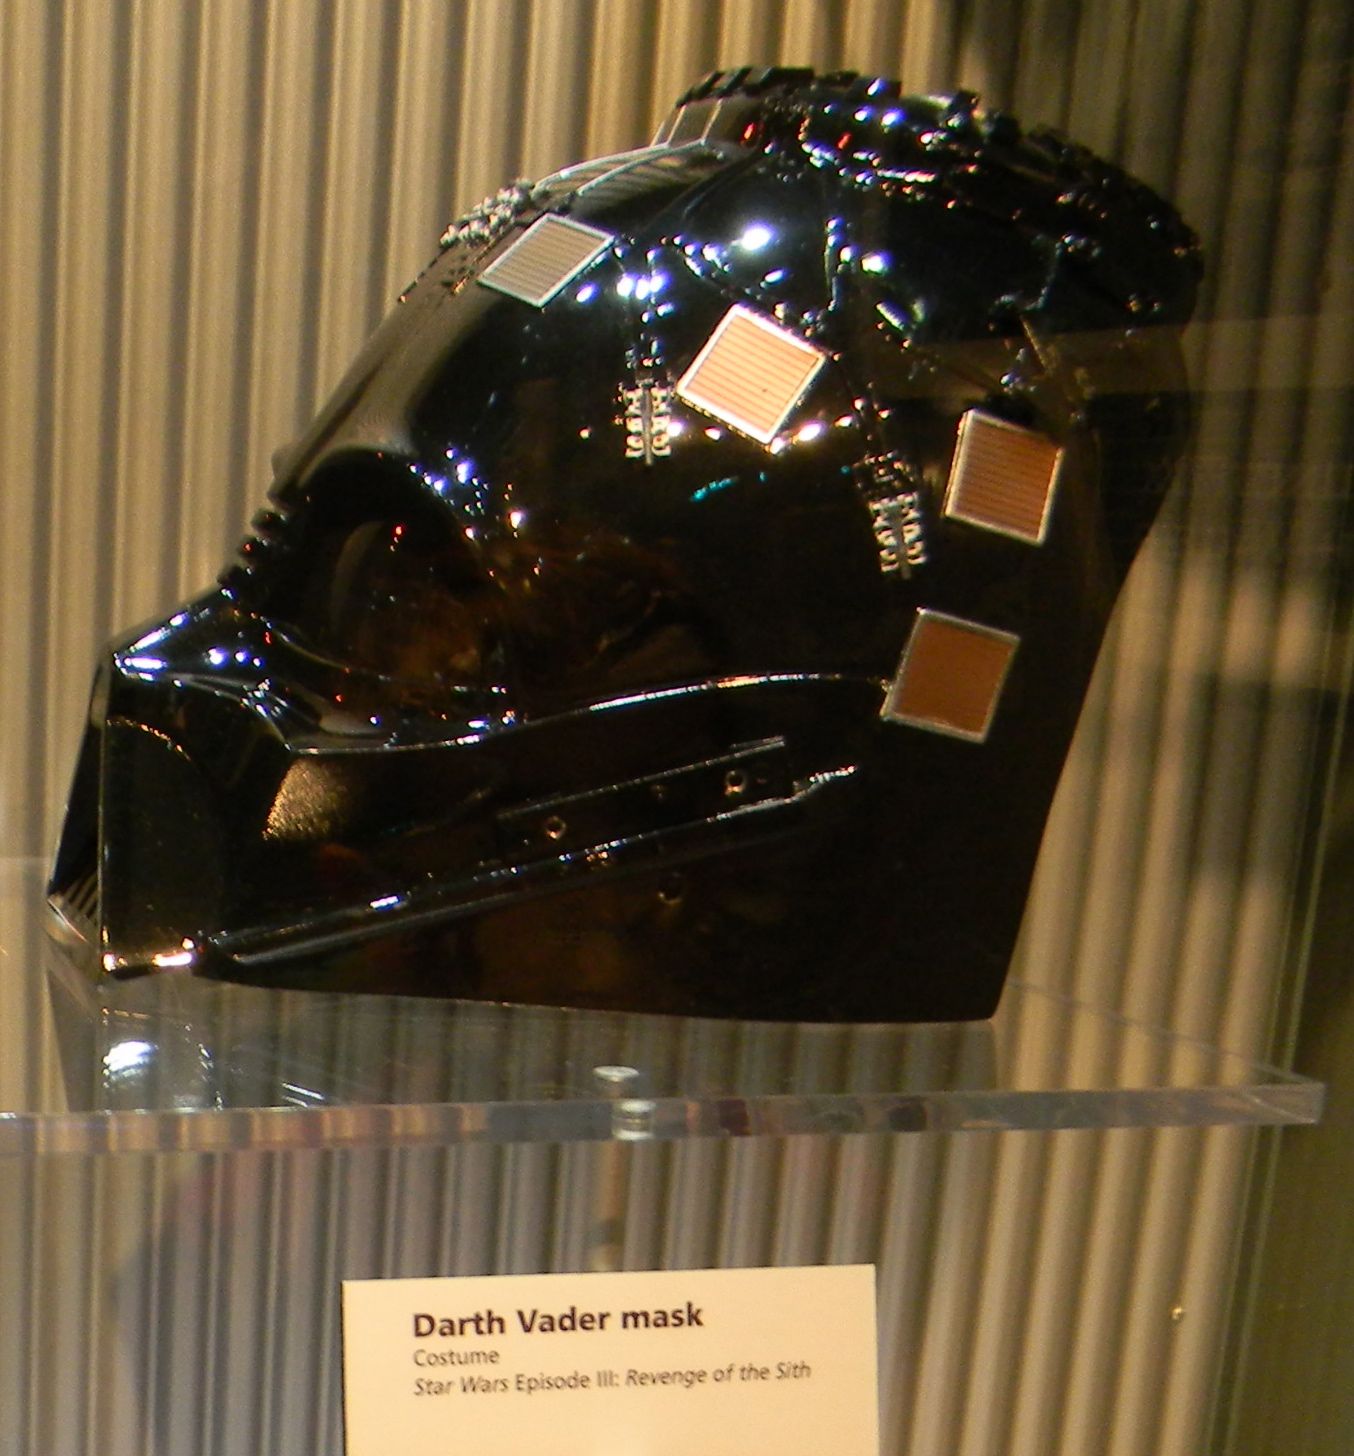 Darth-Vader-mask-from-ROTS-star-wars-revenge-of-the-sith-28054944-1354-1456.jpg